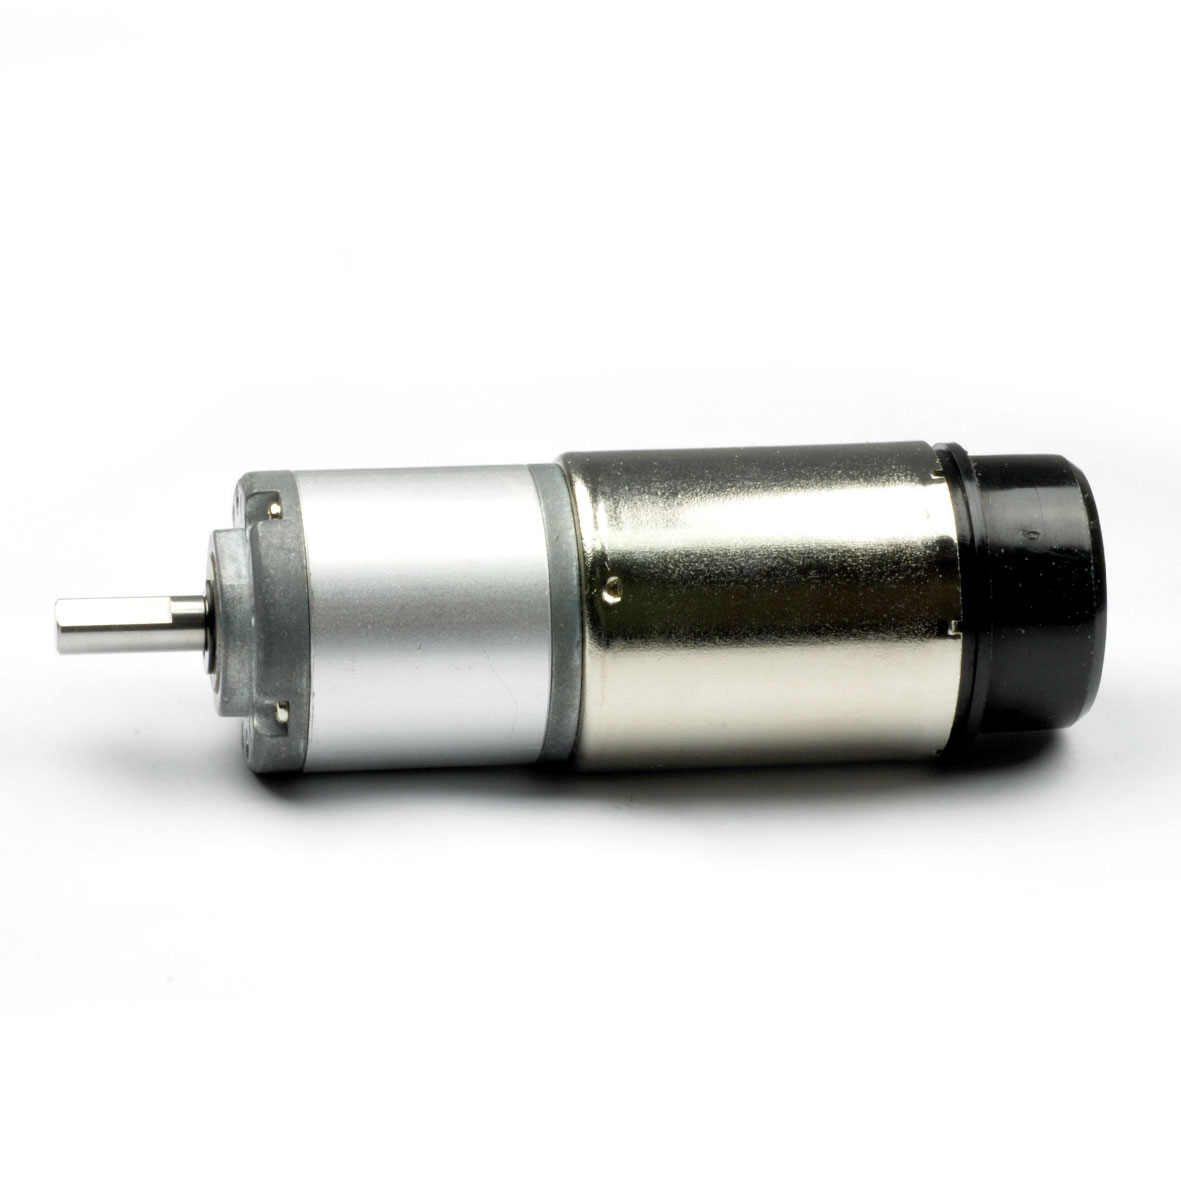 Dia. 32mm Gearbox Motor - 32mm high toque low rpm brushed motor with reduction gear